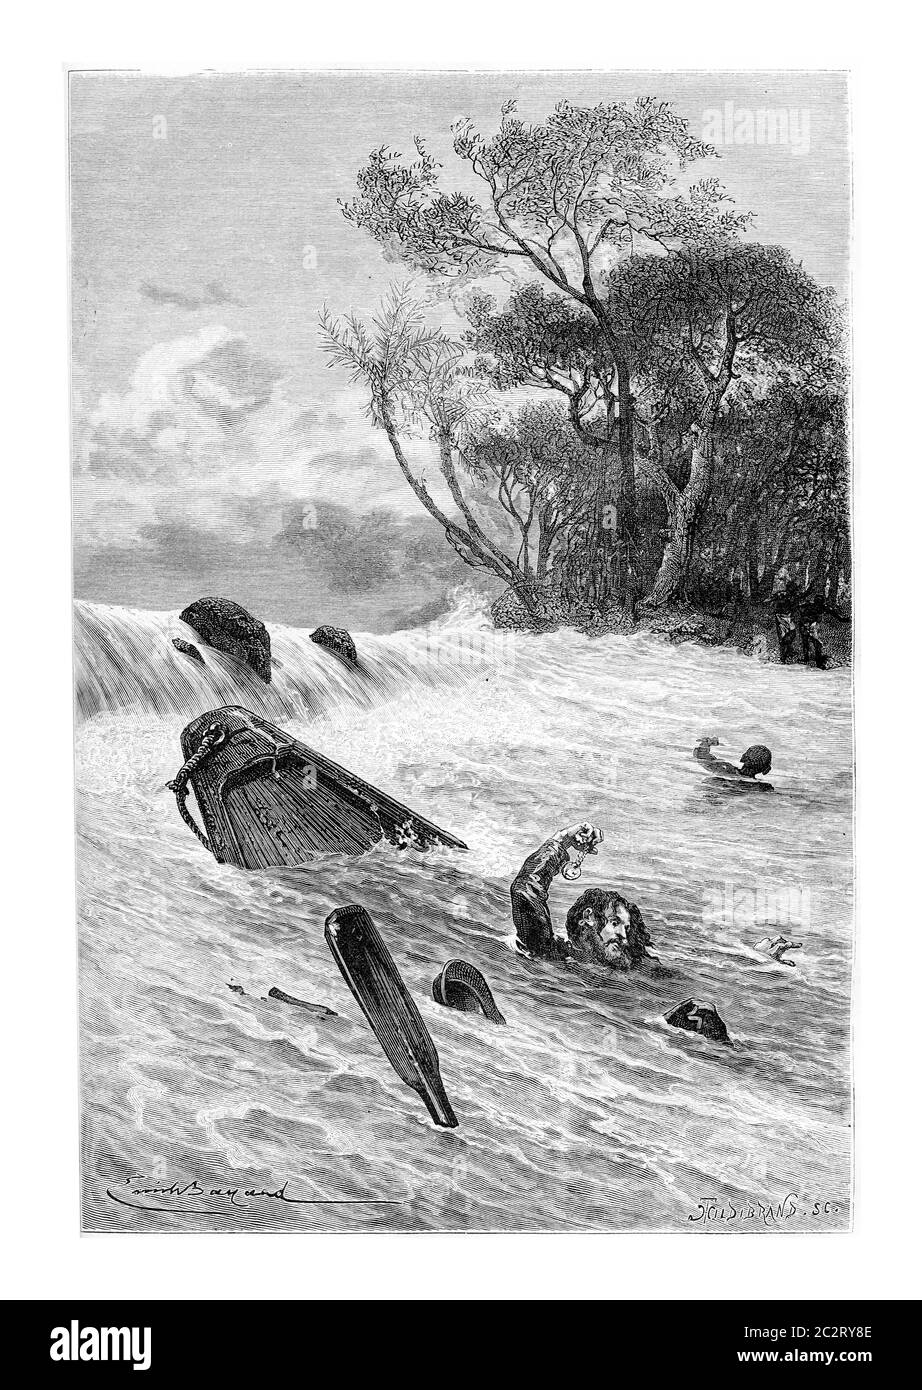 Swimming to Safety, in Angola, Southern Africa, drawing by Bayard based on a sketch by Serpa Pinto, vintage engraved illustration. Le Tour du Monde, T Stock Photo